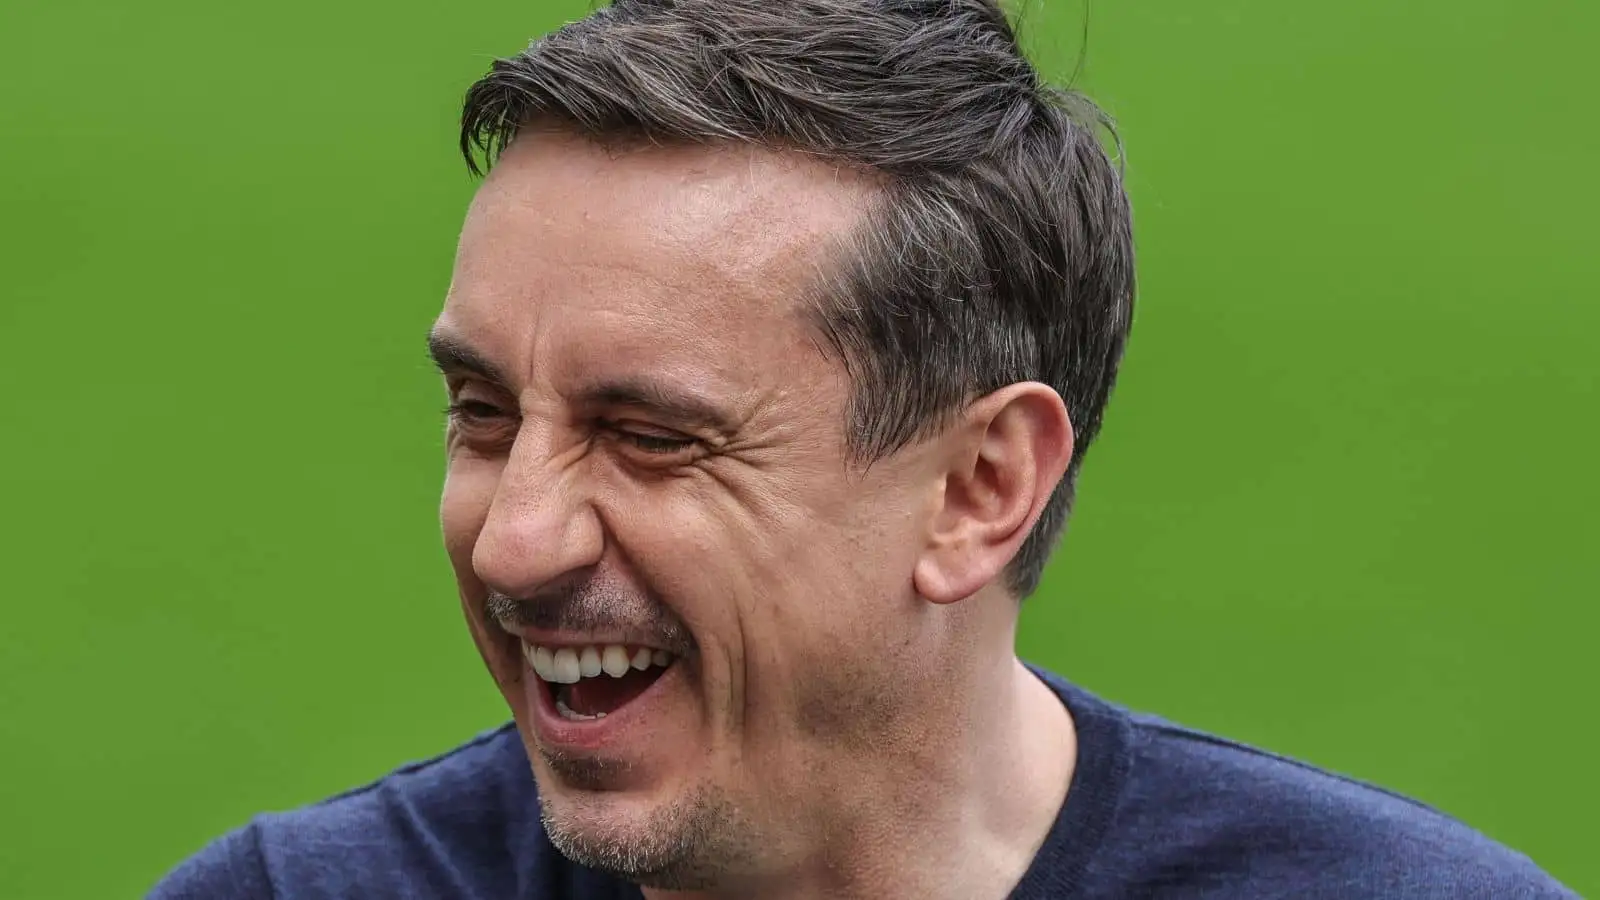 Gary Neville full of laughter during the Premier League match Newcastle United vs Arsenal at St. James's Park, Newcastle